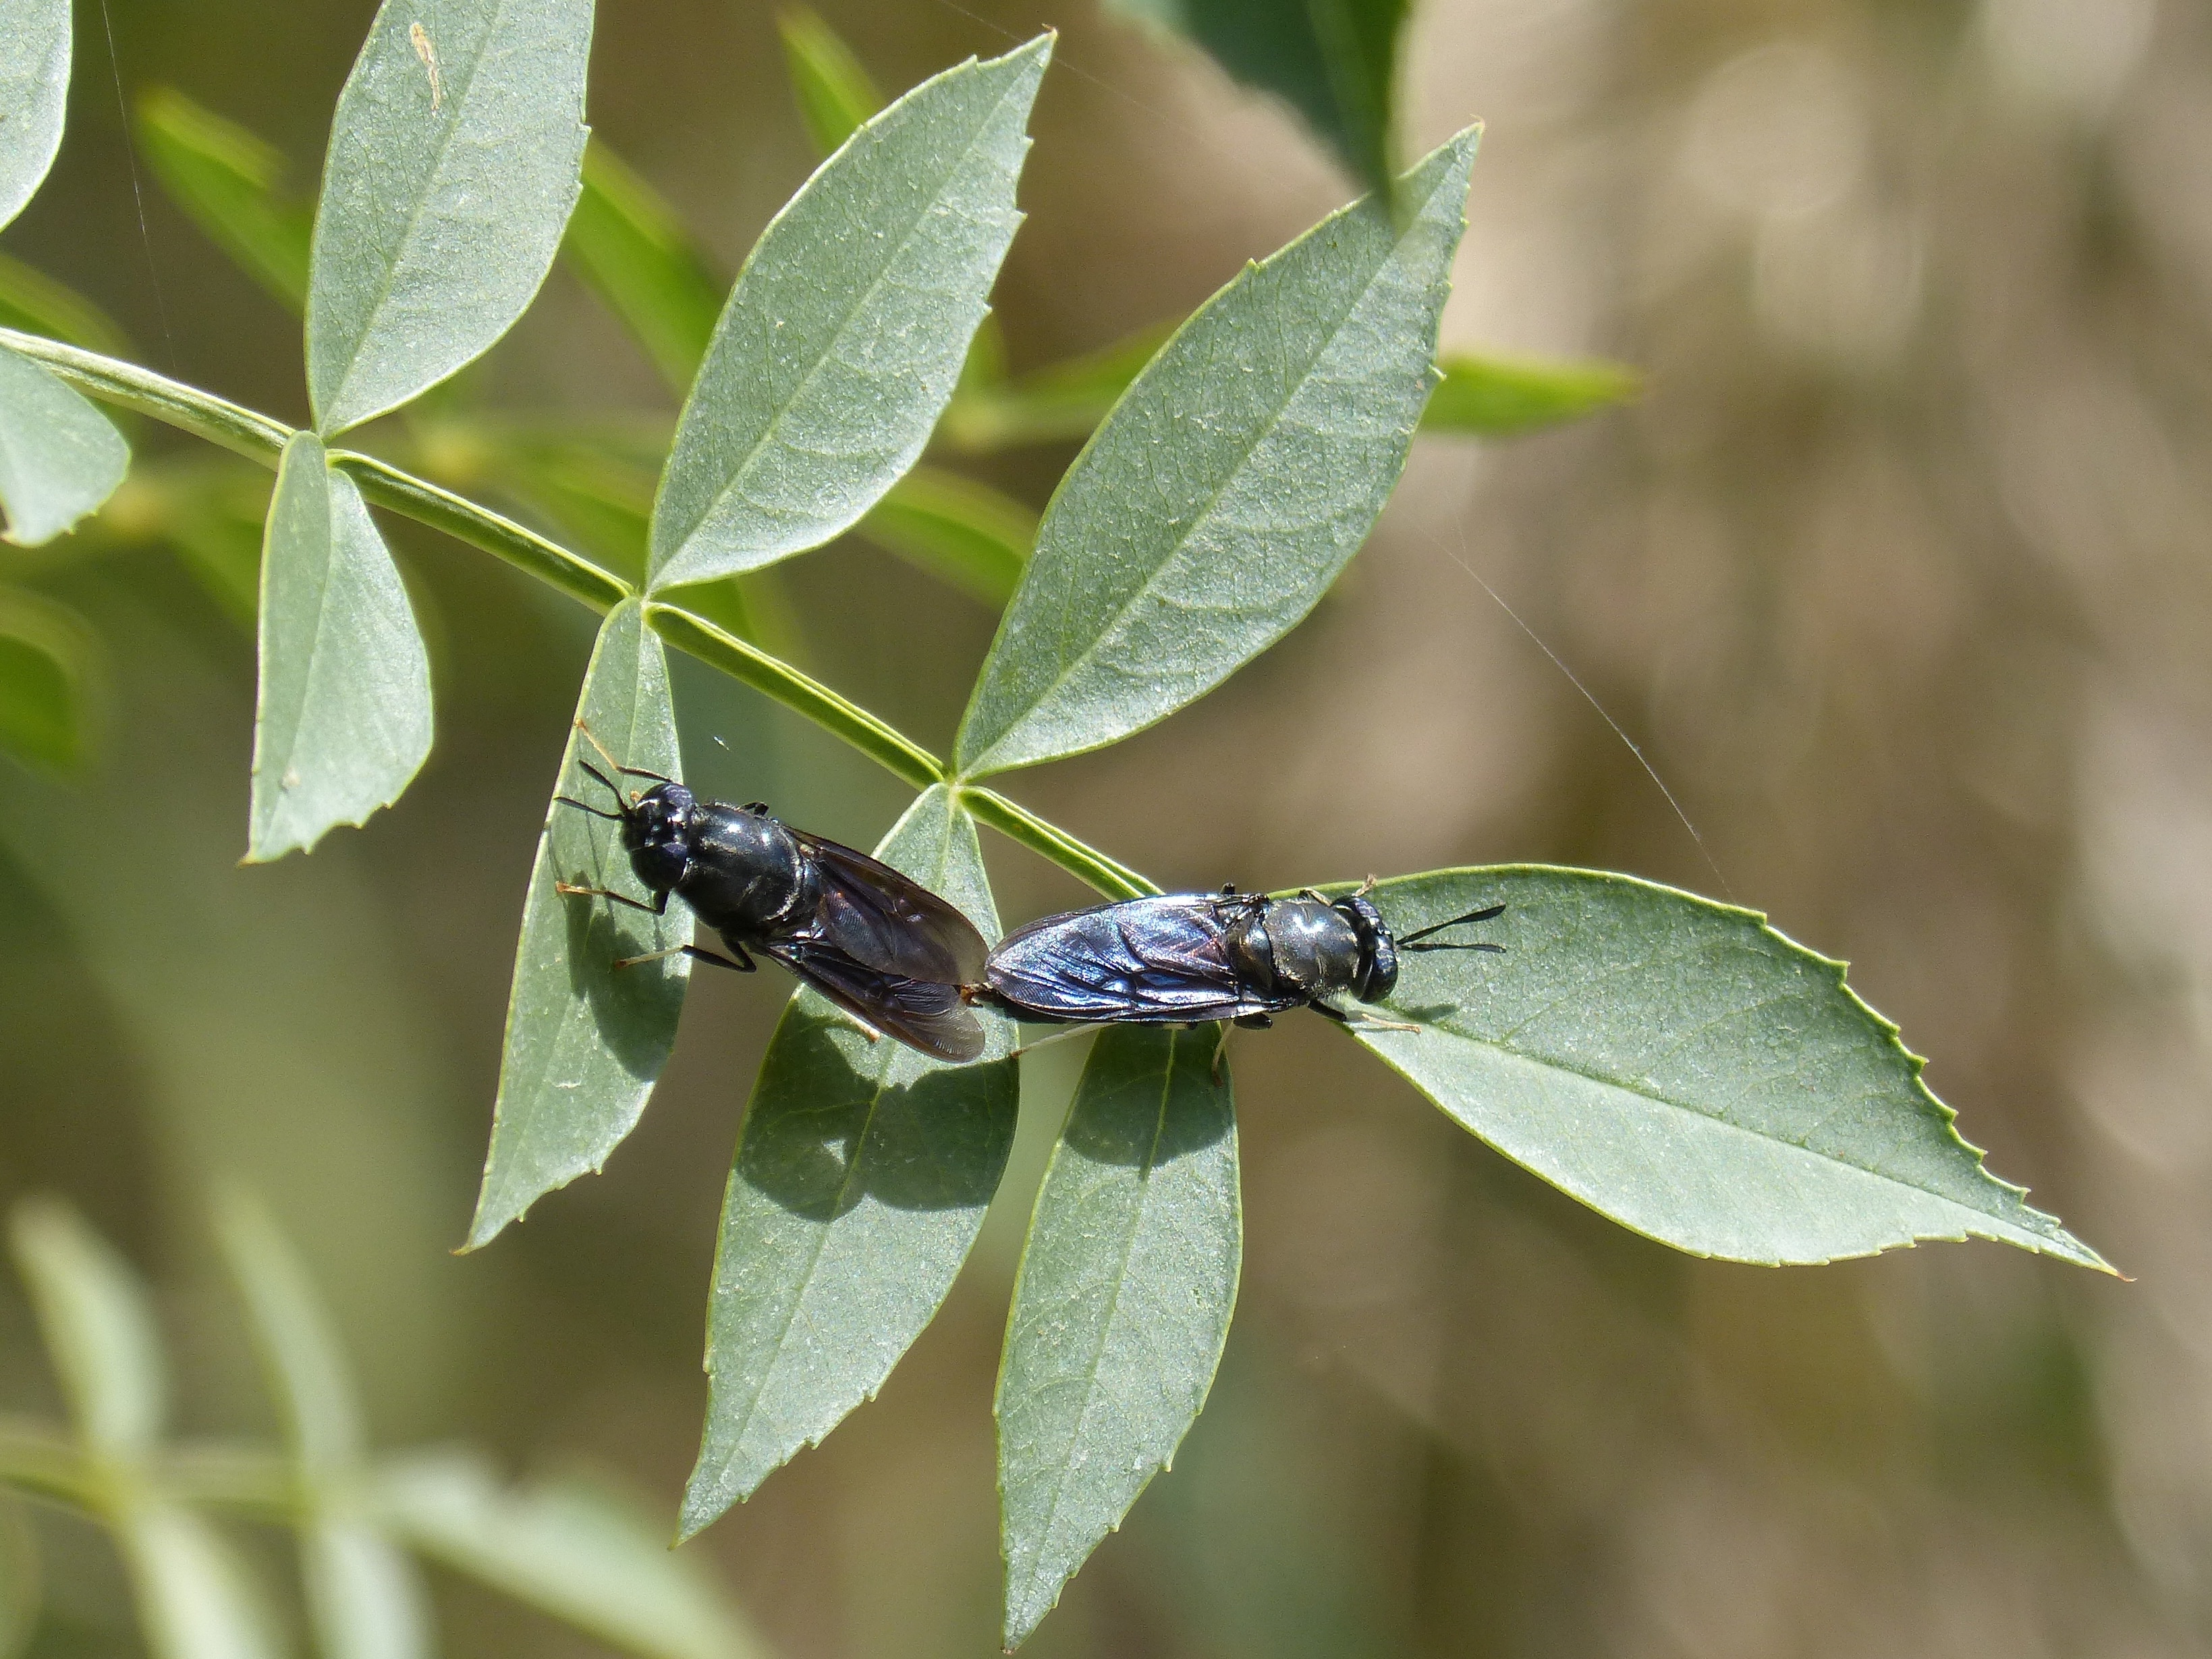 Copulation, Insects Mating, Blackfly, leaf, insect